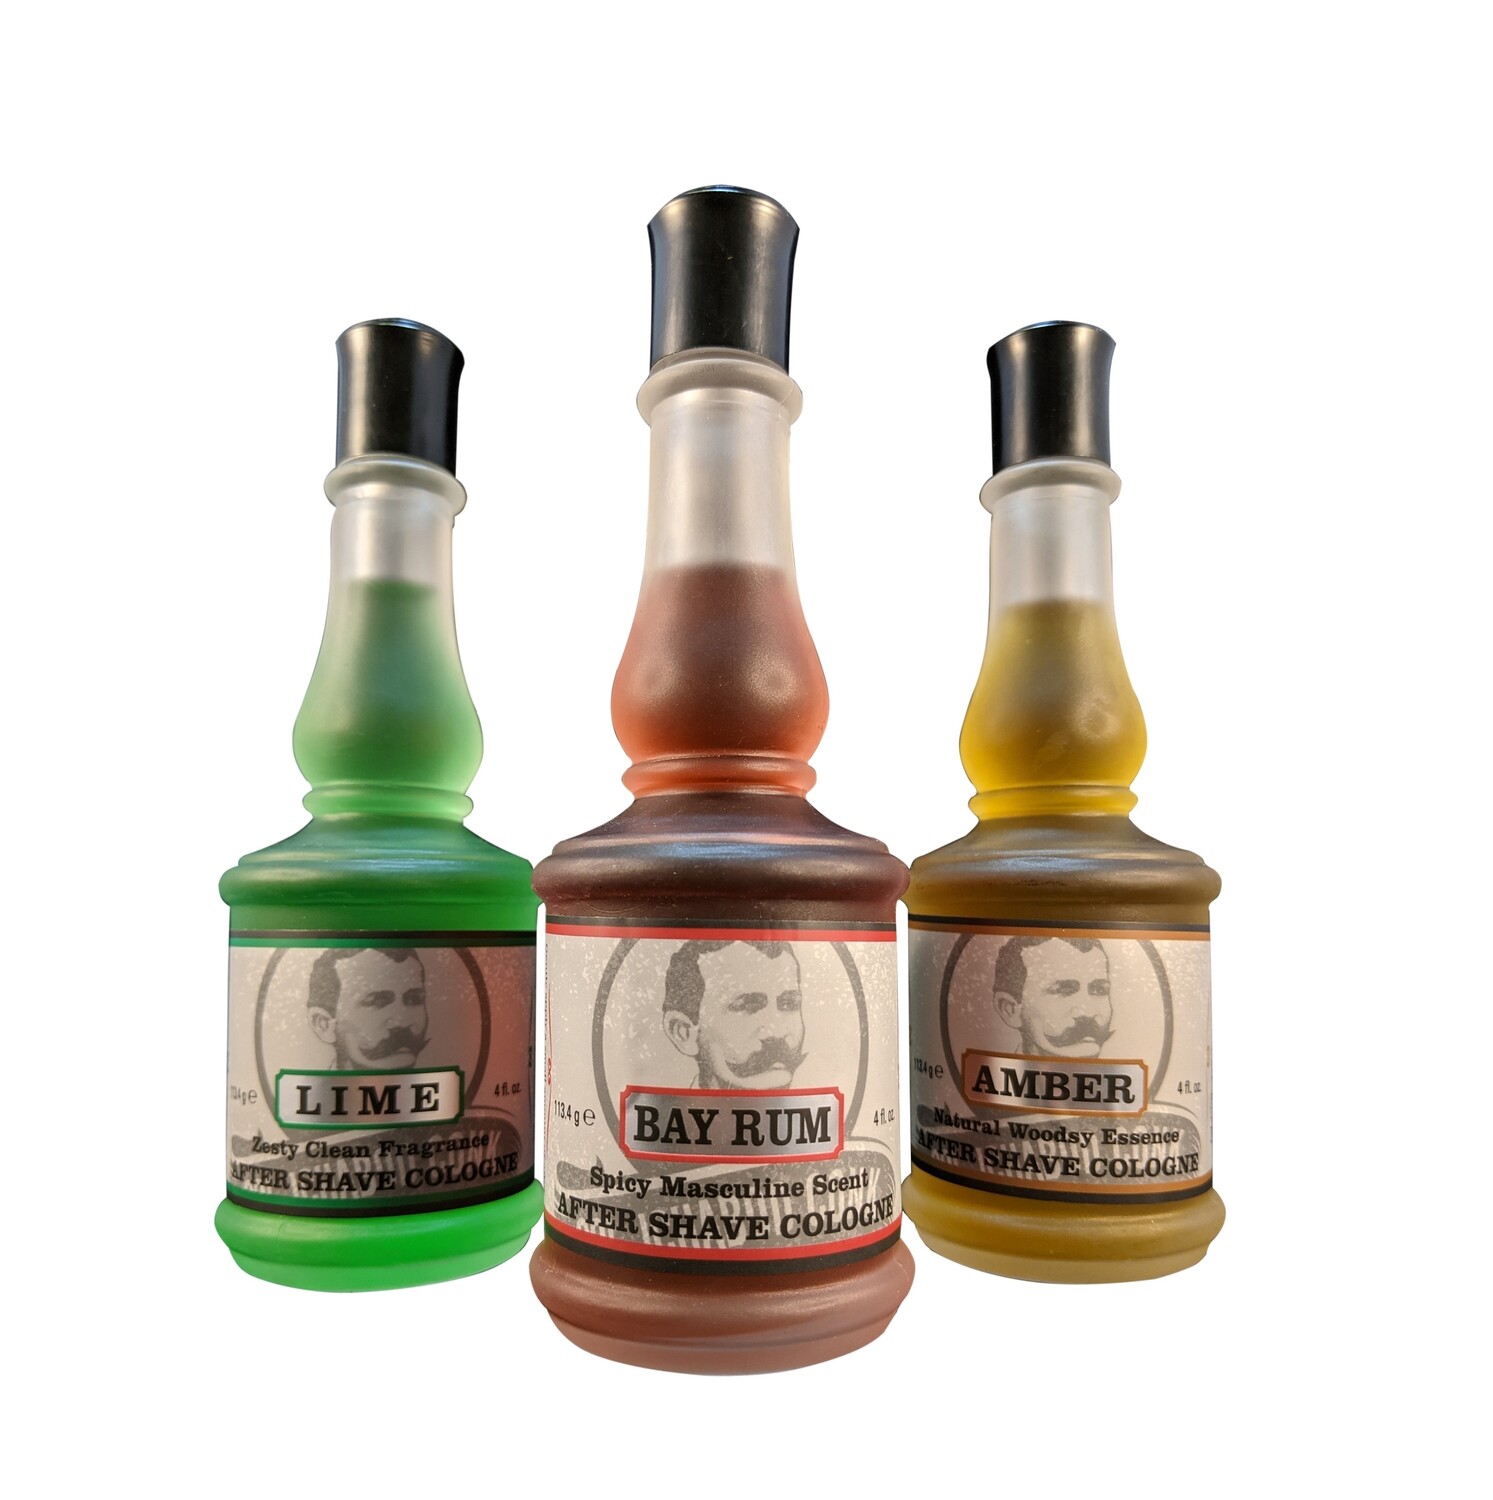 COL. CONK AFTER SHAVE COLOGNE - 3 SCENTS AVAILABLE